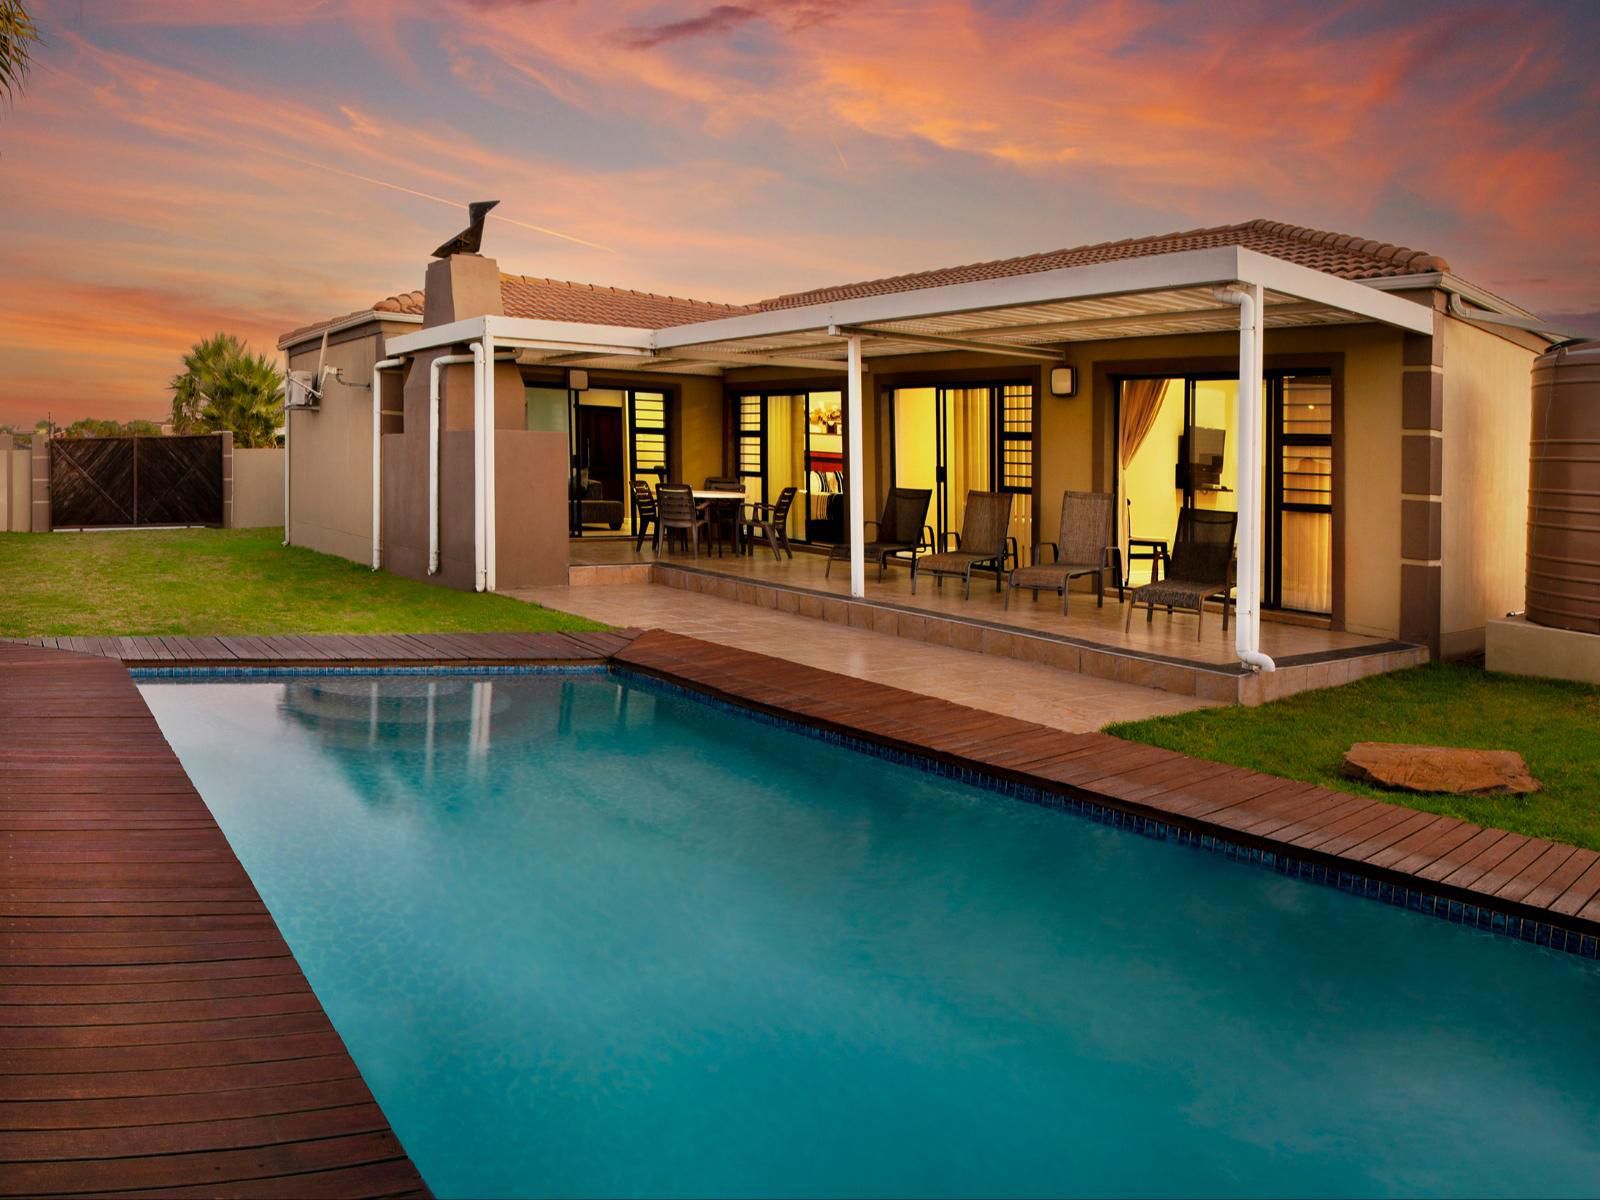 Bro Homes And Villas Parsons Vlei Port Elizabeth Eastern Cape South Africa House, Building, Architecture, Swimming Pool